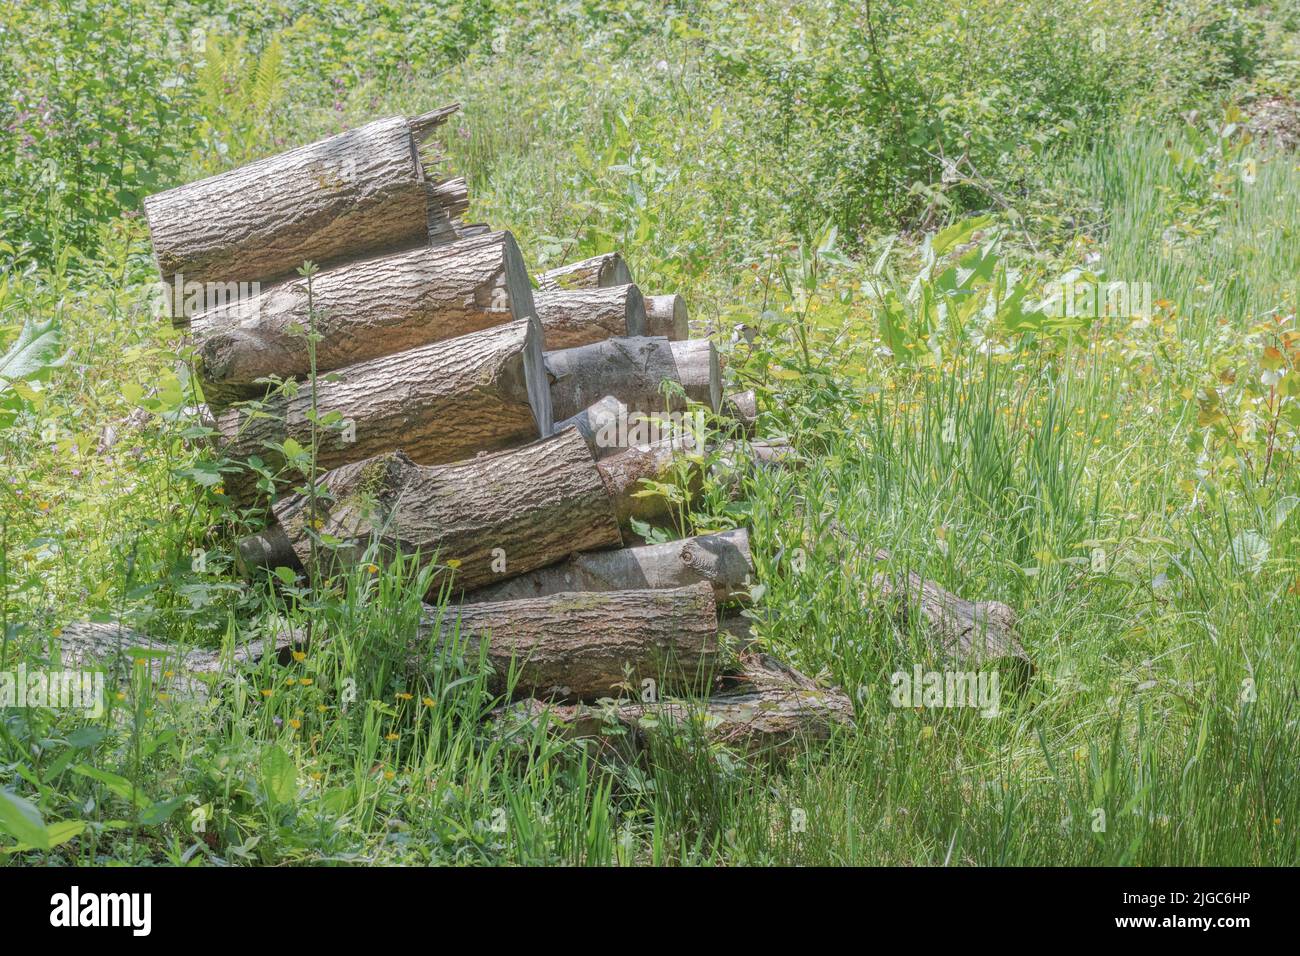 Forgotten overgrown pile of old logs in UK woodland countryside area on a sunny day. Possibly for winter fuel topic, rustic woodpile, toppling concept. Stock Photo